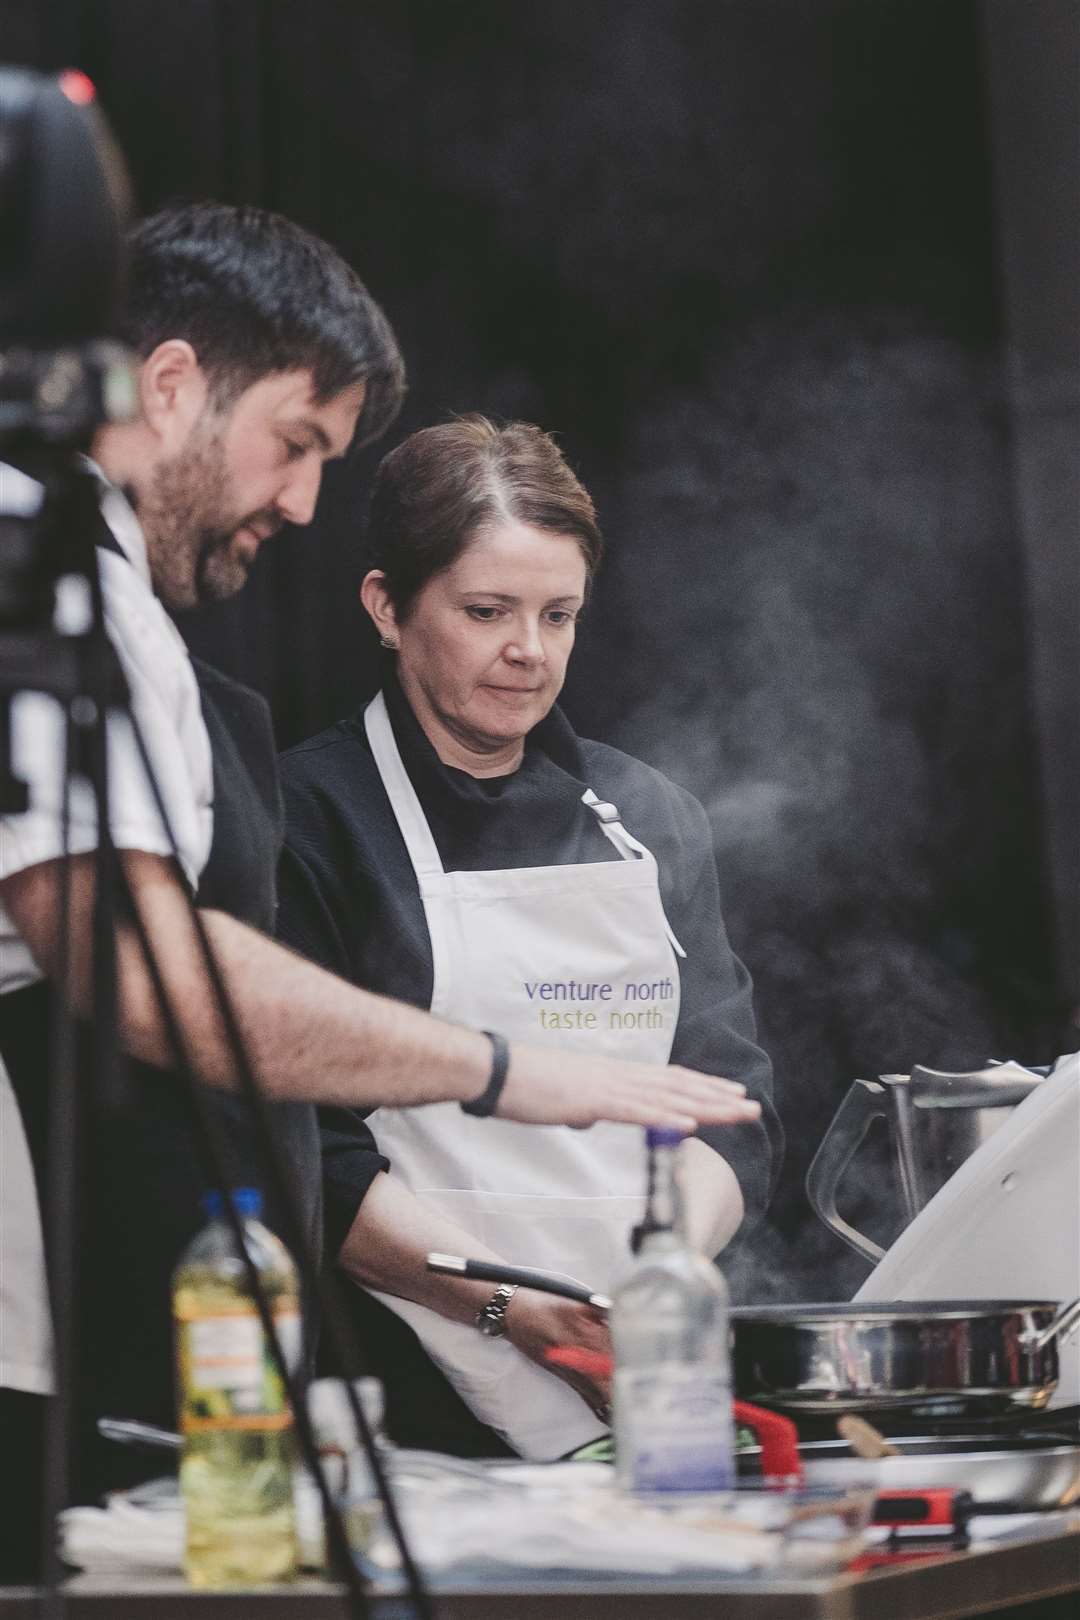 Chef Grant Macnicol is assisted by a member of the audience during one of his cookery demonstrations on Sunday. Picture: Colin Campbell Photography